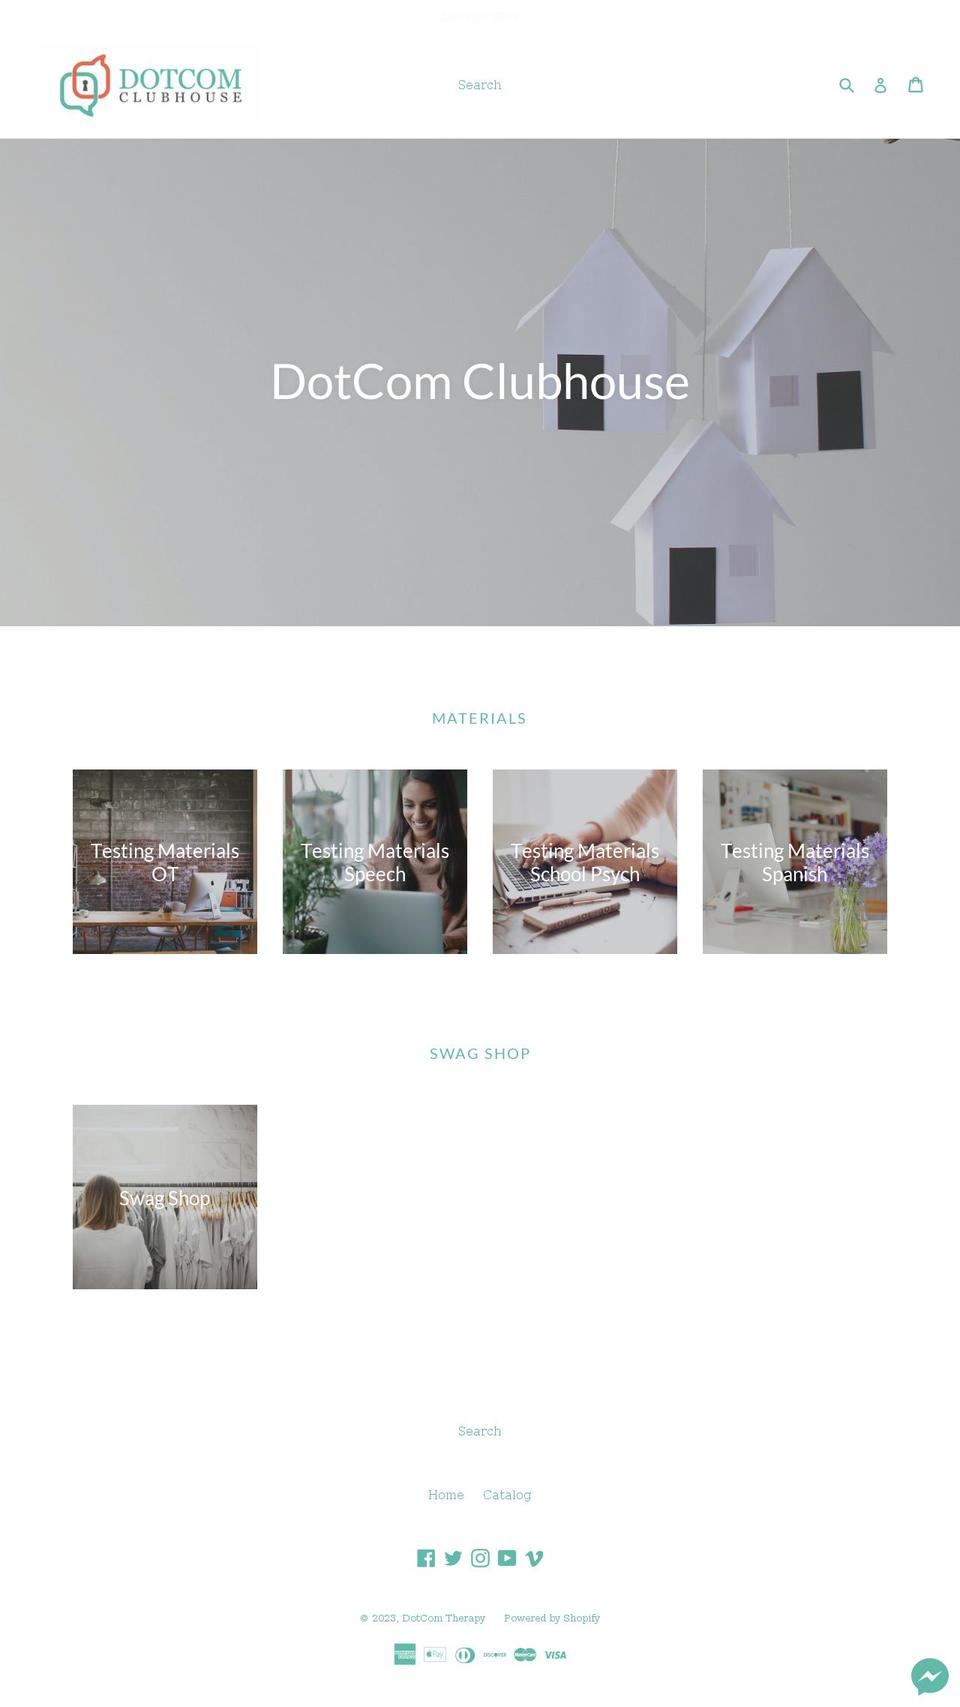 With therapist bios - Initial Shopify theme site example dctclubhouse.com